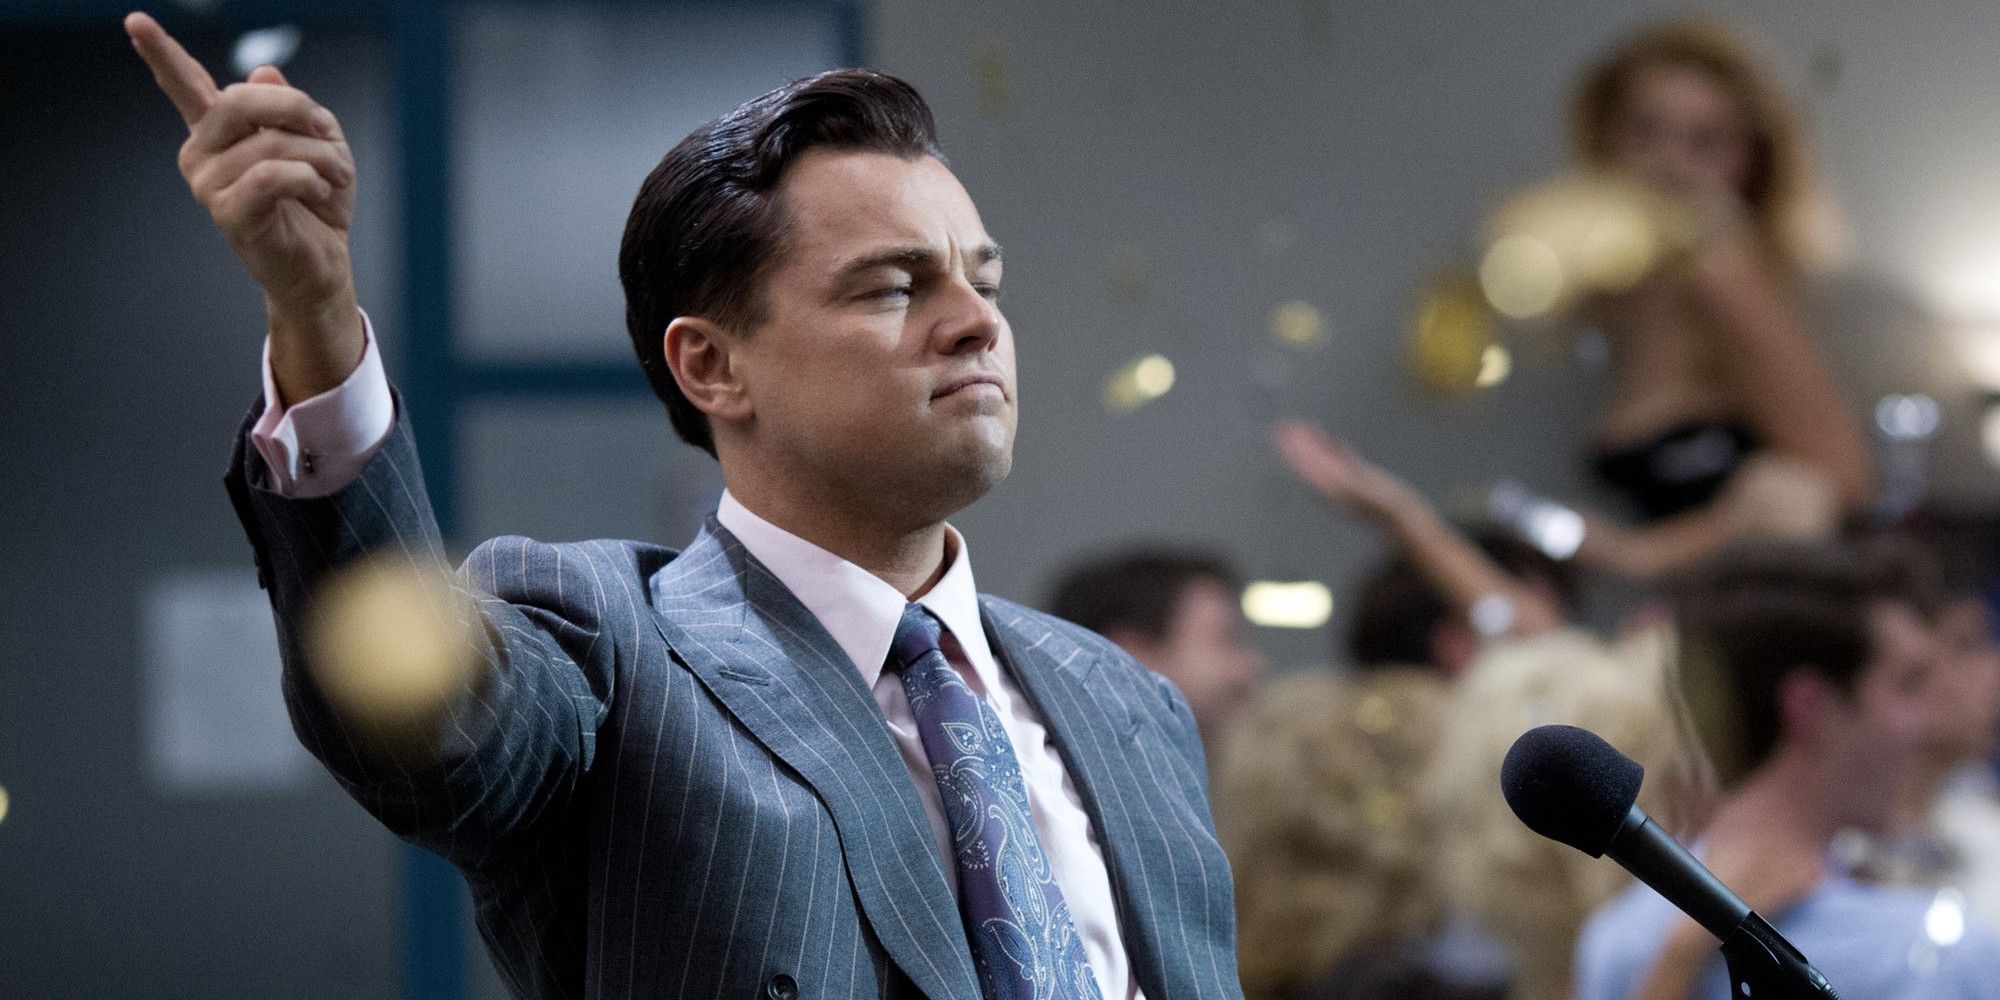 Jordan Belfort standing amid a celebration at his office in The Wolf of Wall Street.